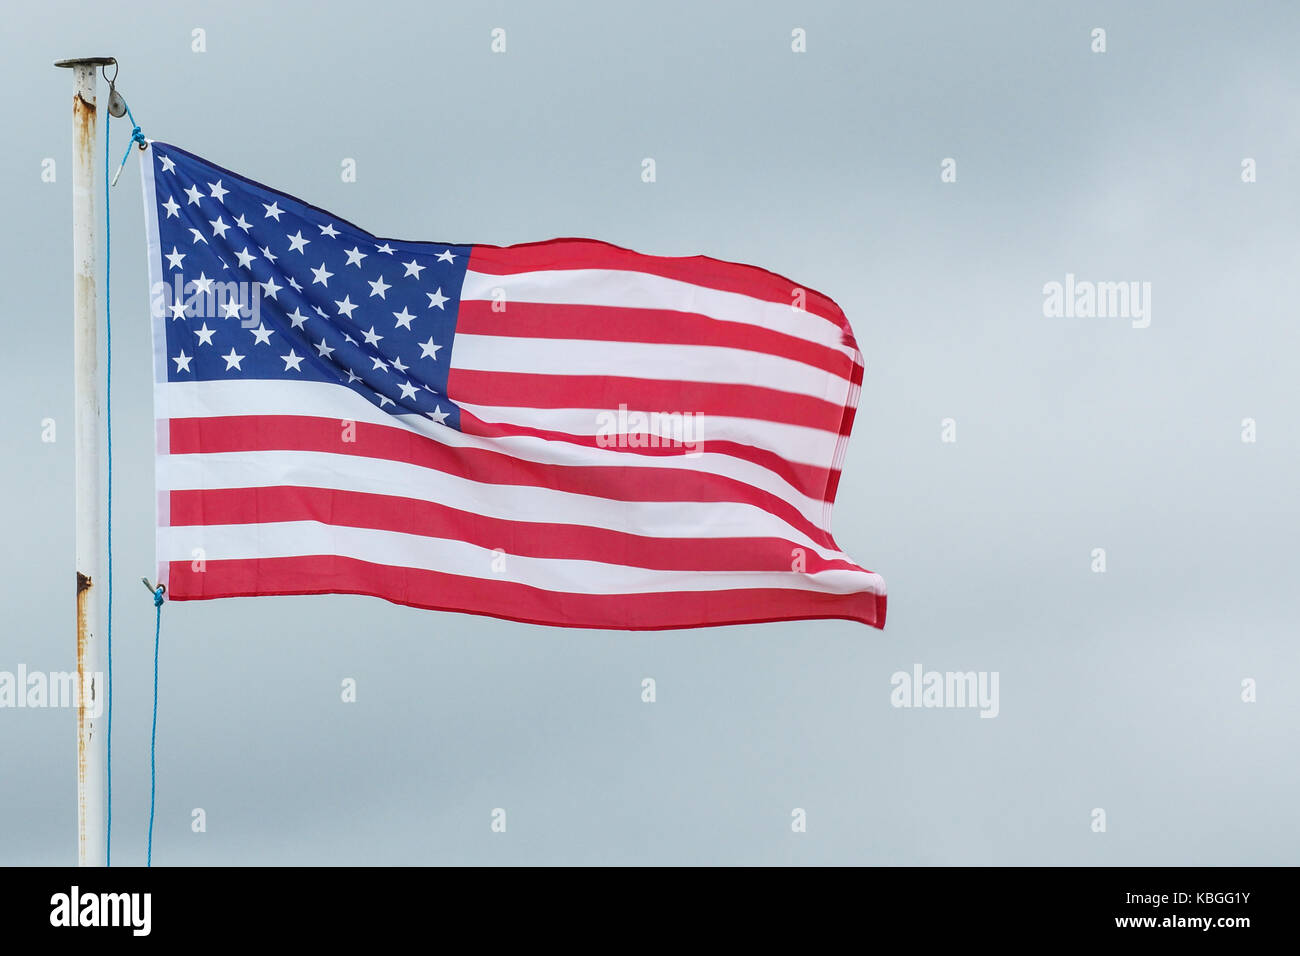 The flag of the United States Of America blows in the wind Stock Photo